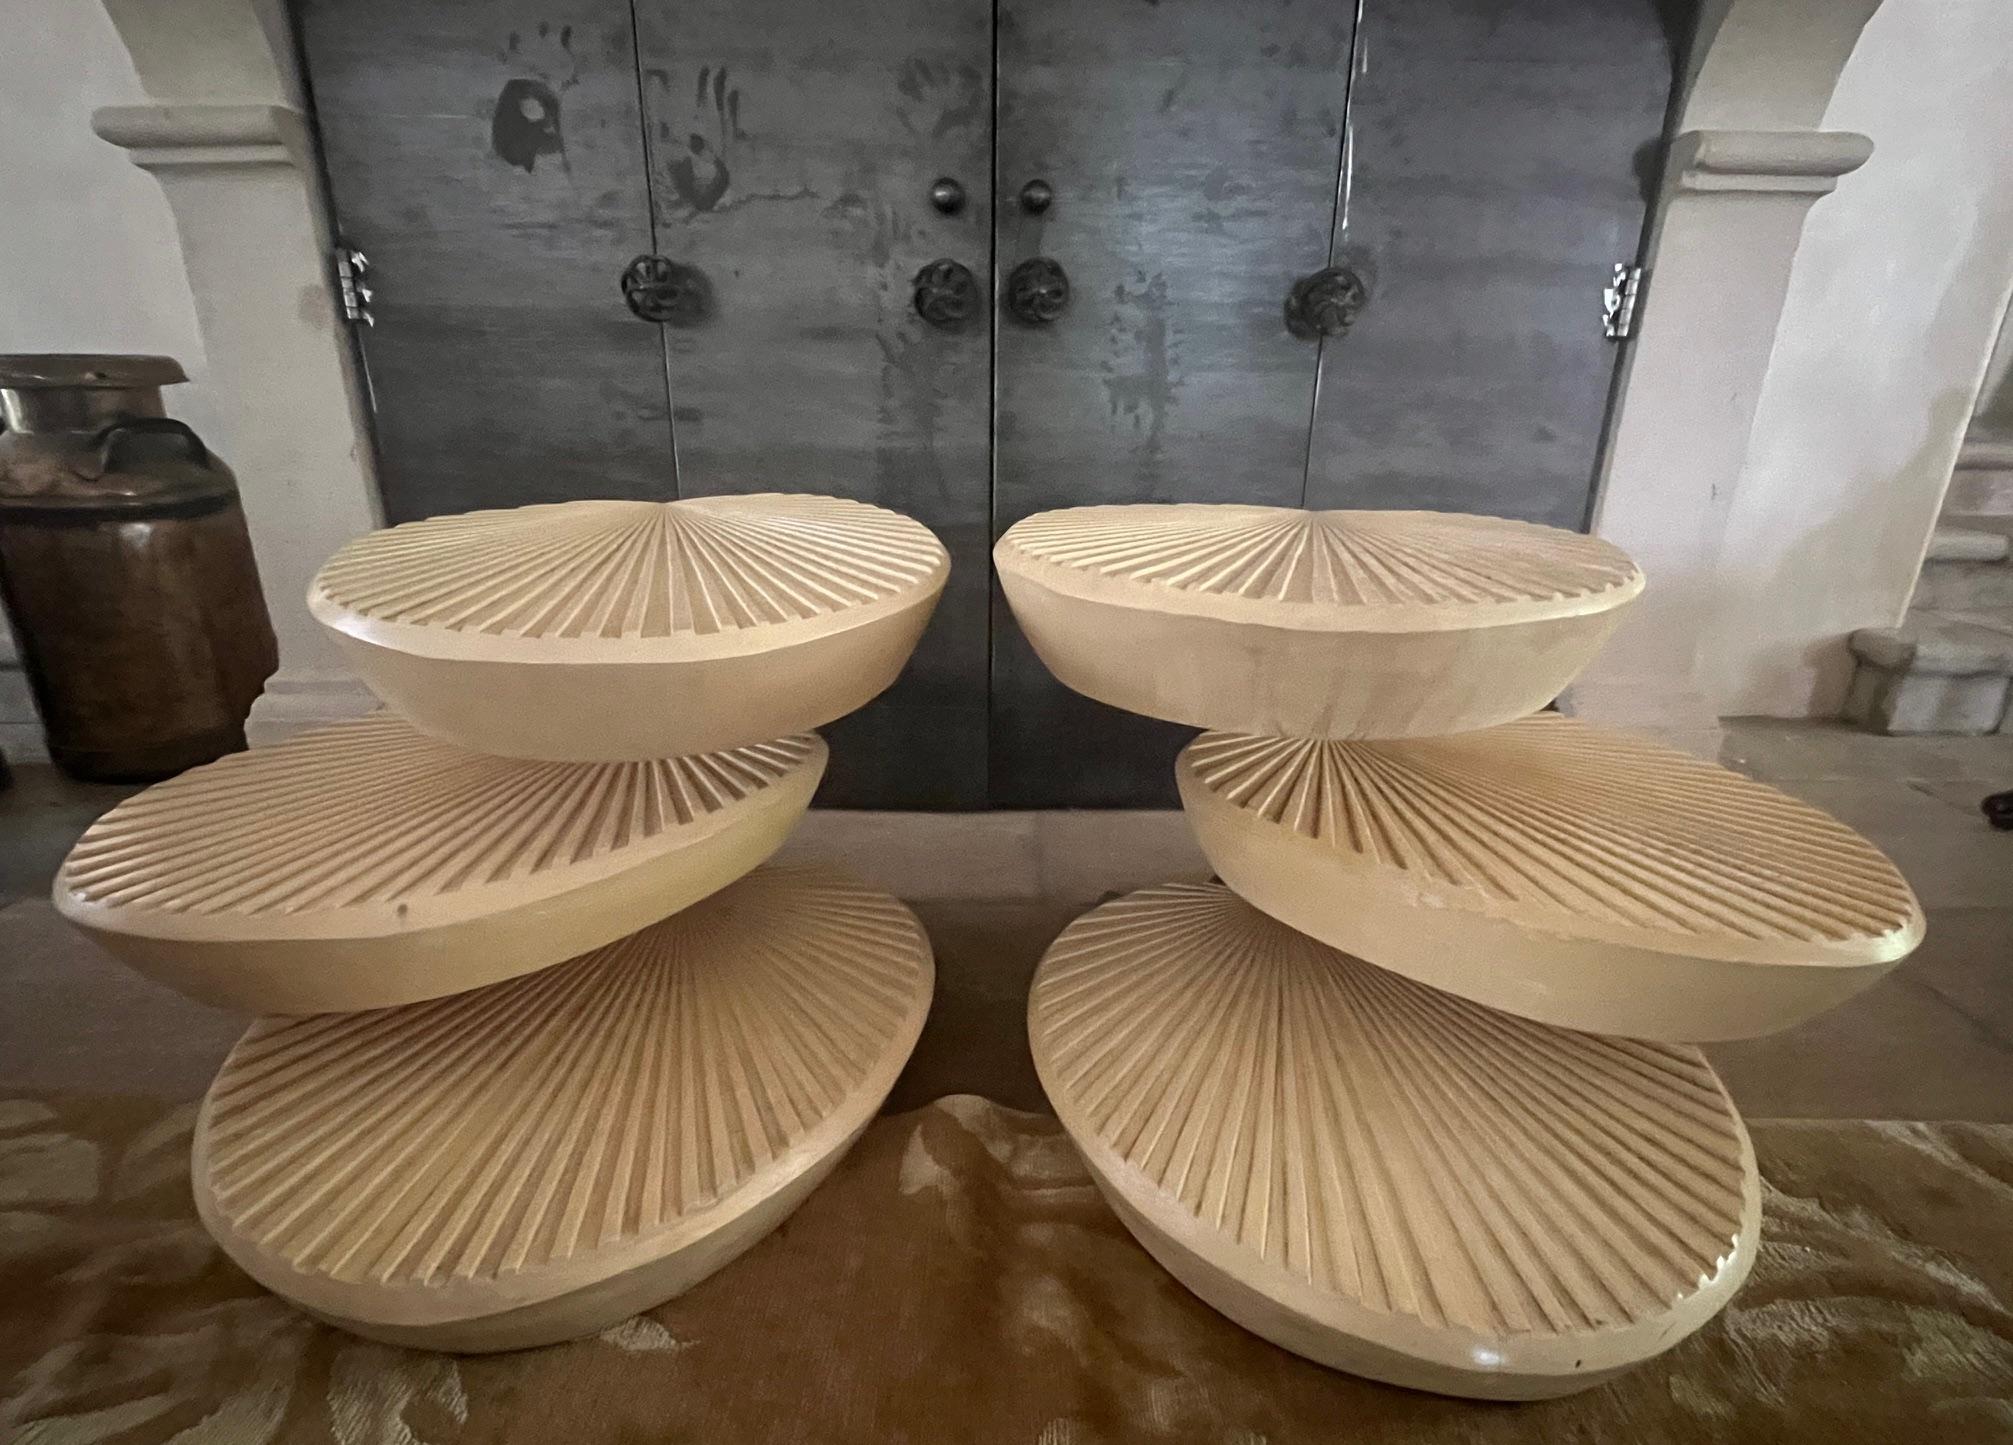 Light wood lacquered, rotating, and tiered occasional or side tables, set of 2. The tiers are in the shape of leaves, the top two rotate, each has a stainless steel support. There are no identifying marks.

All furniture can be picked up for free in